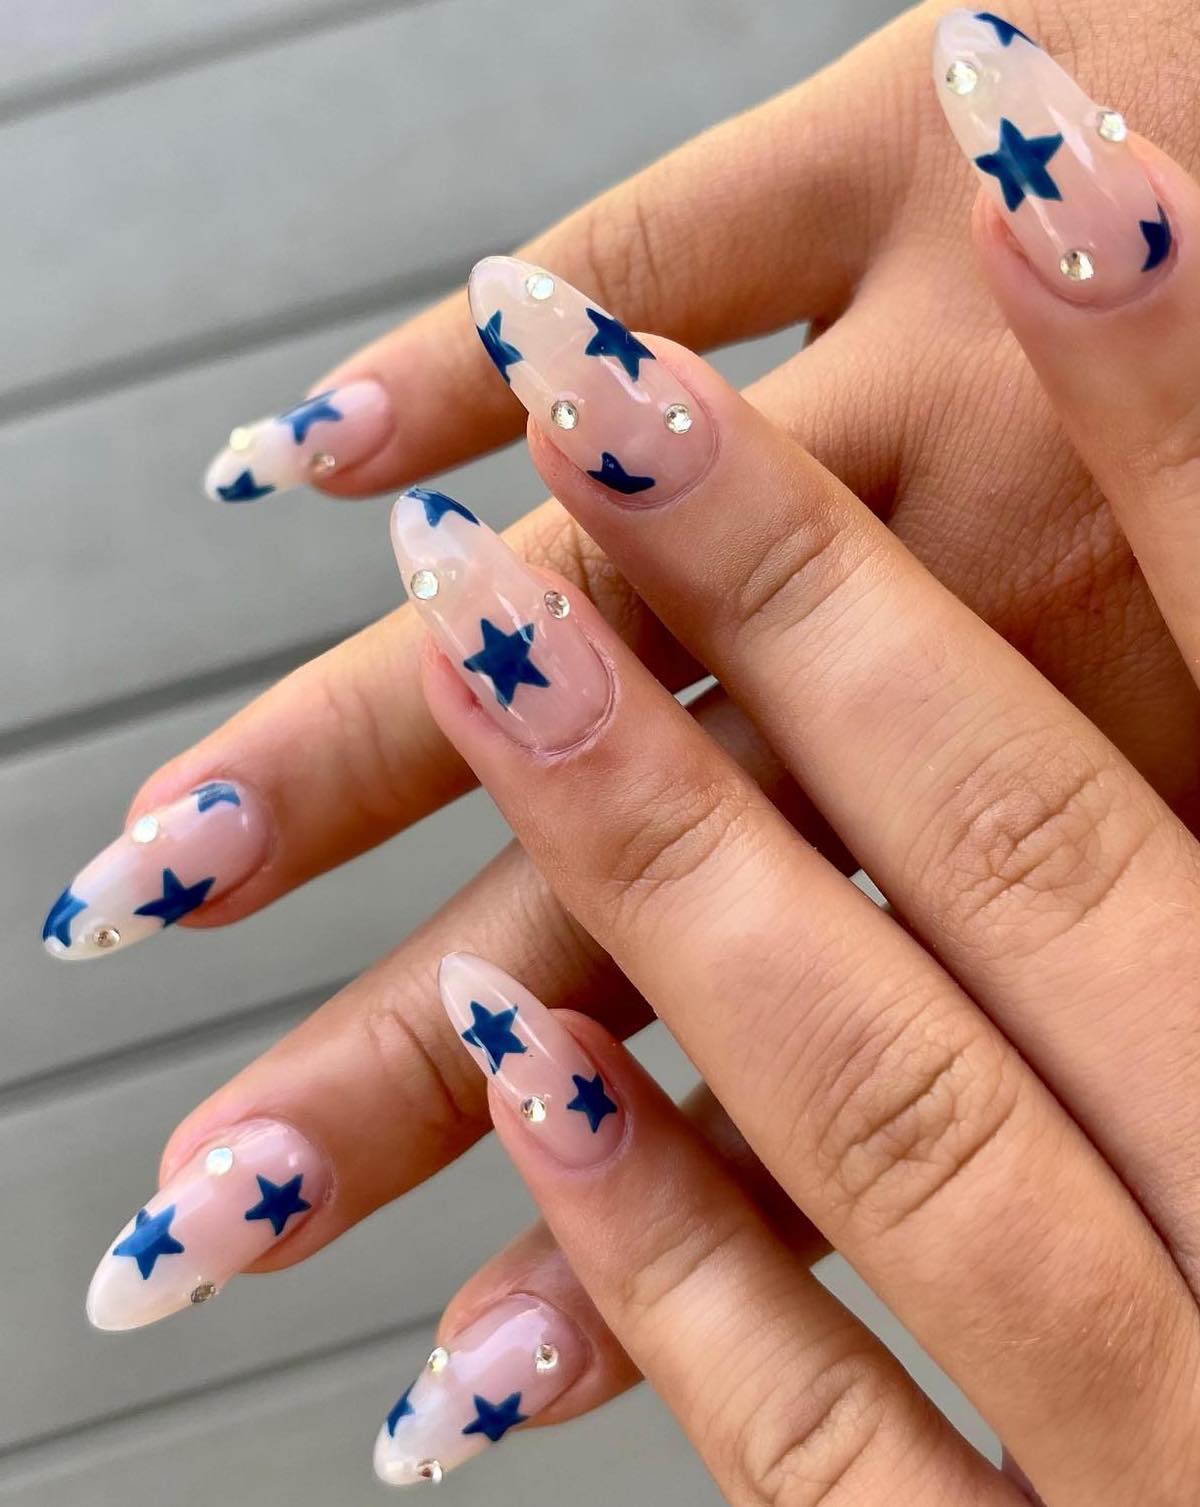 Blue star nails in almond shape.